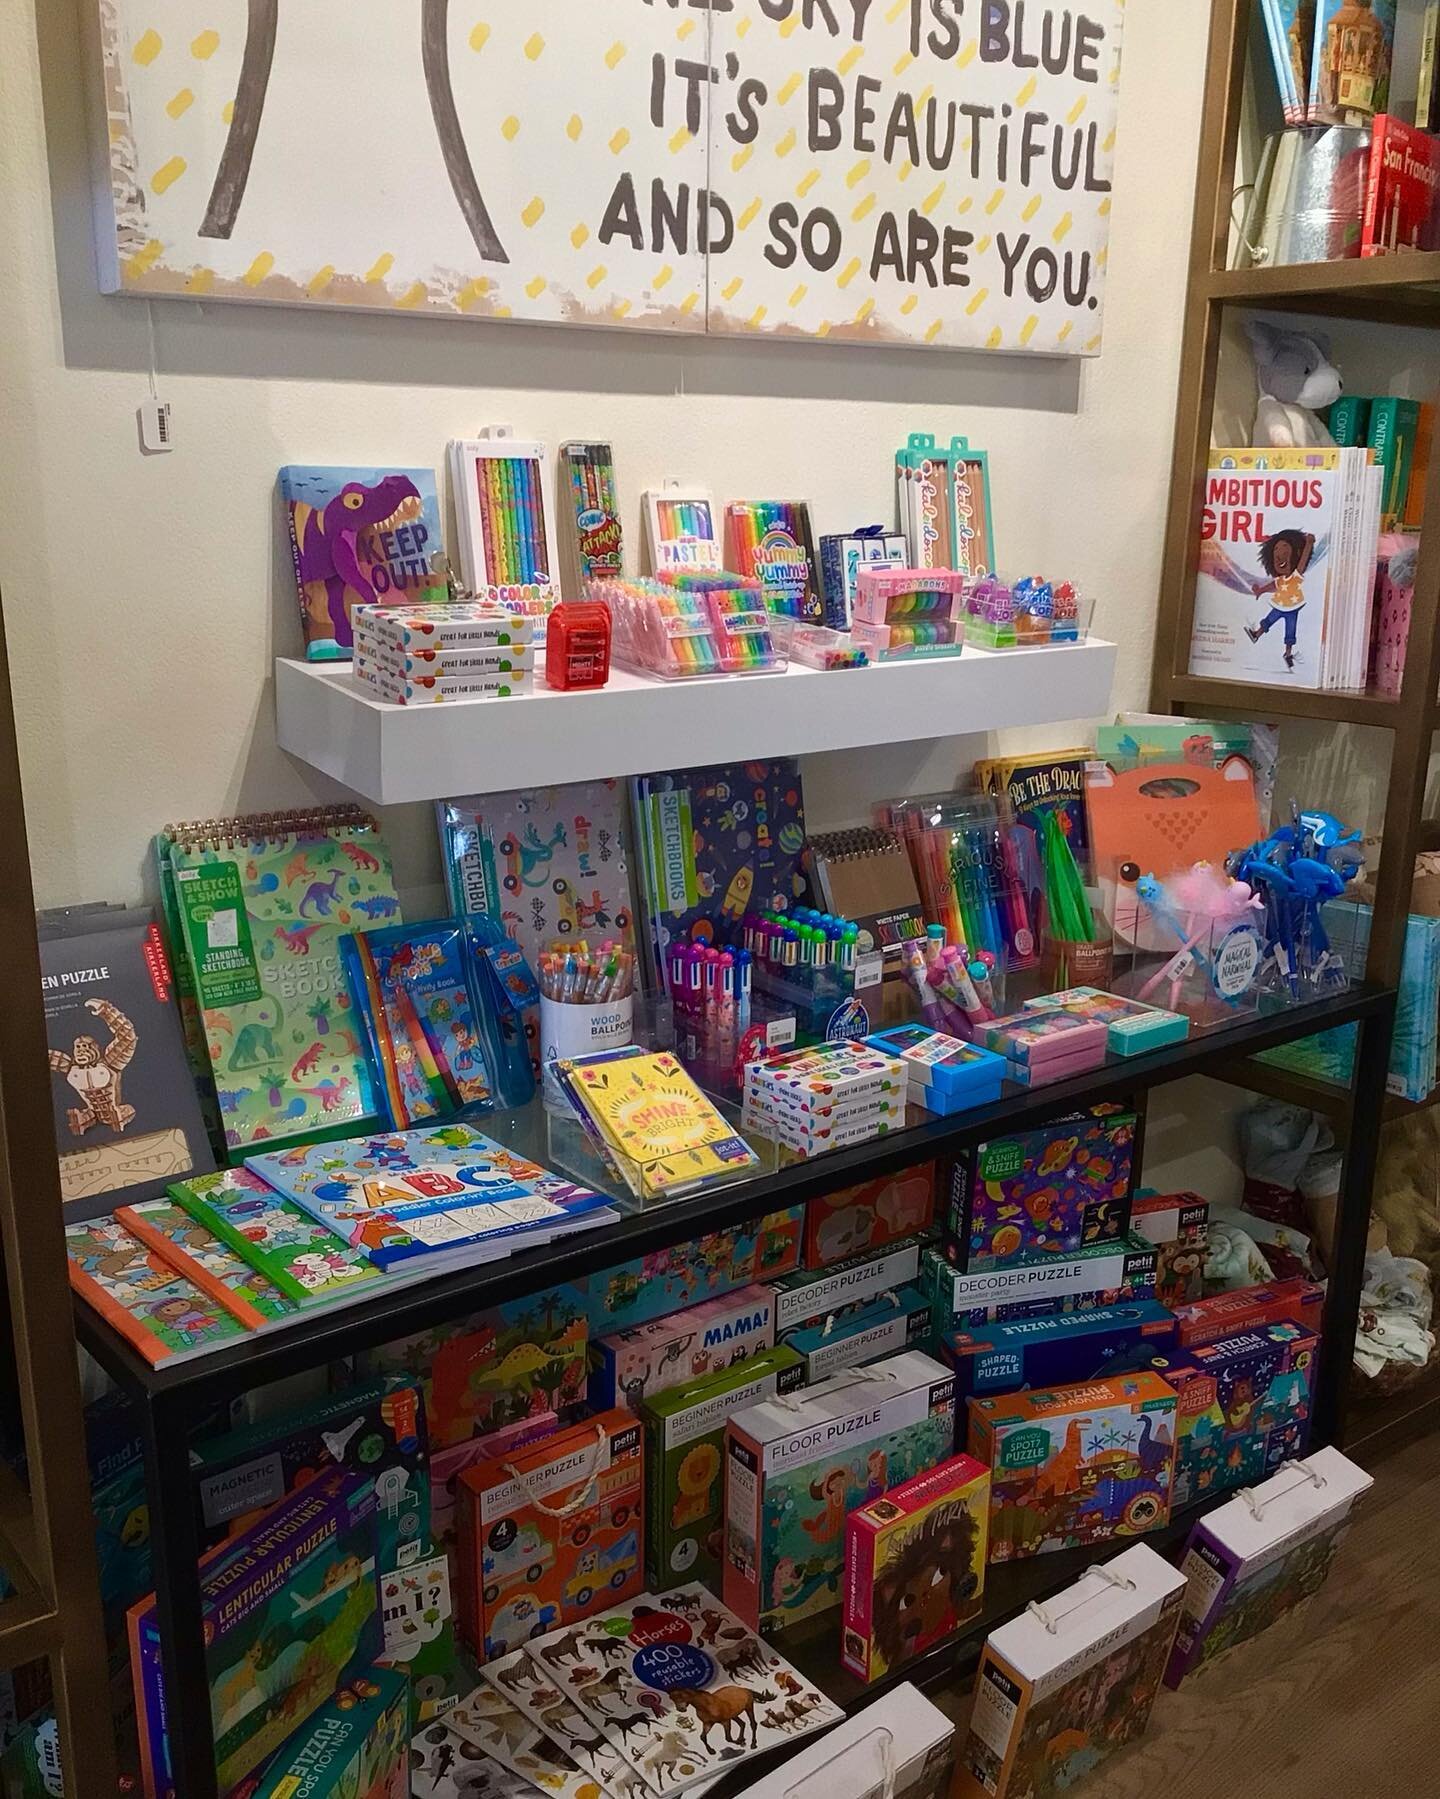 Going Back to School is more fun with a little gift from Jolt! Stop by either of our stores!#downtownnovatobusinessassociation  #redhillshoppingcenter #backtoschool  #smallbusiness